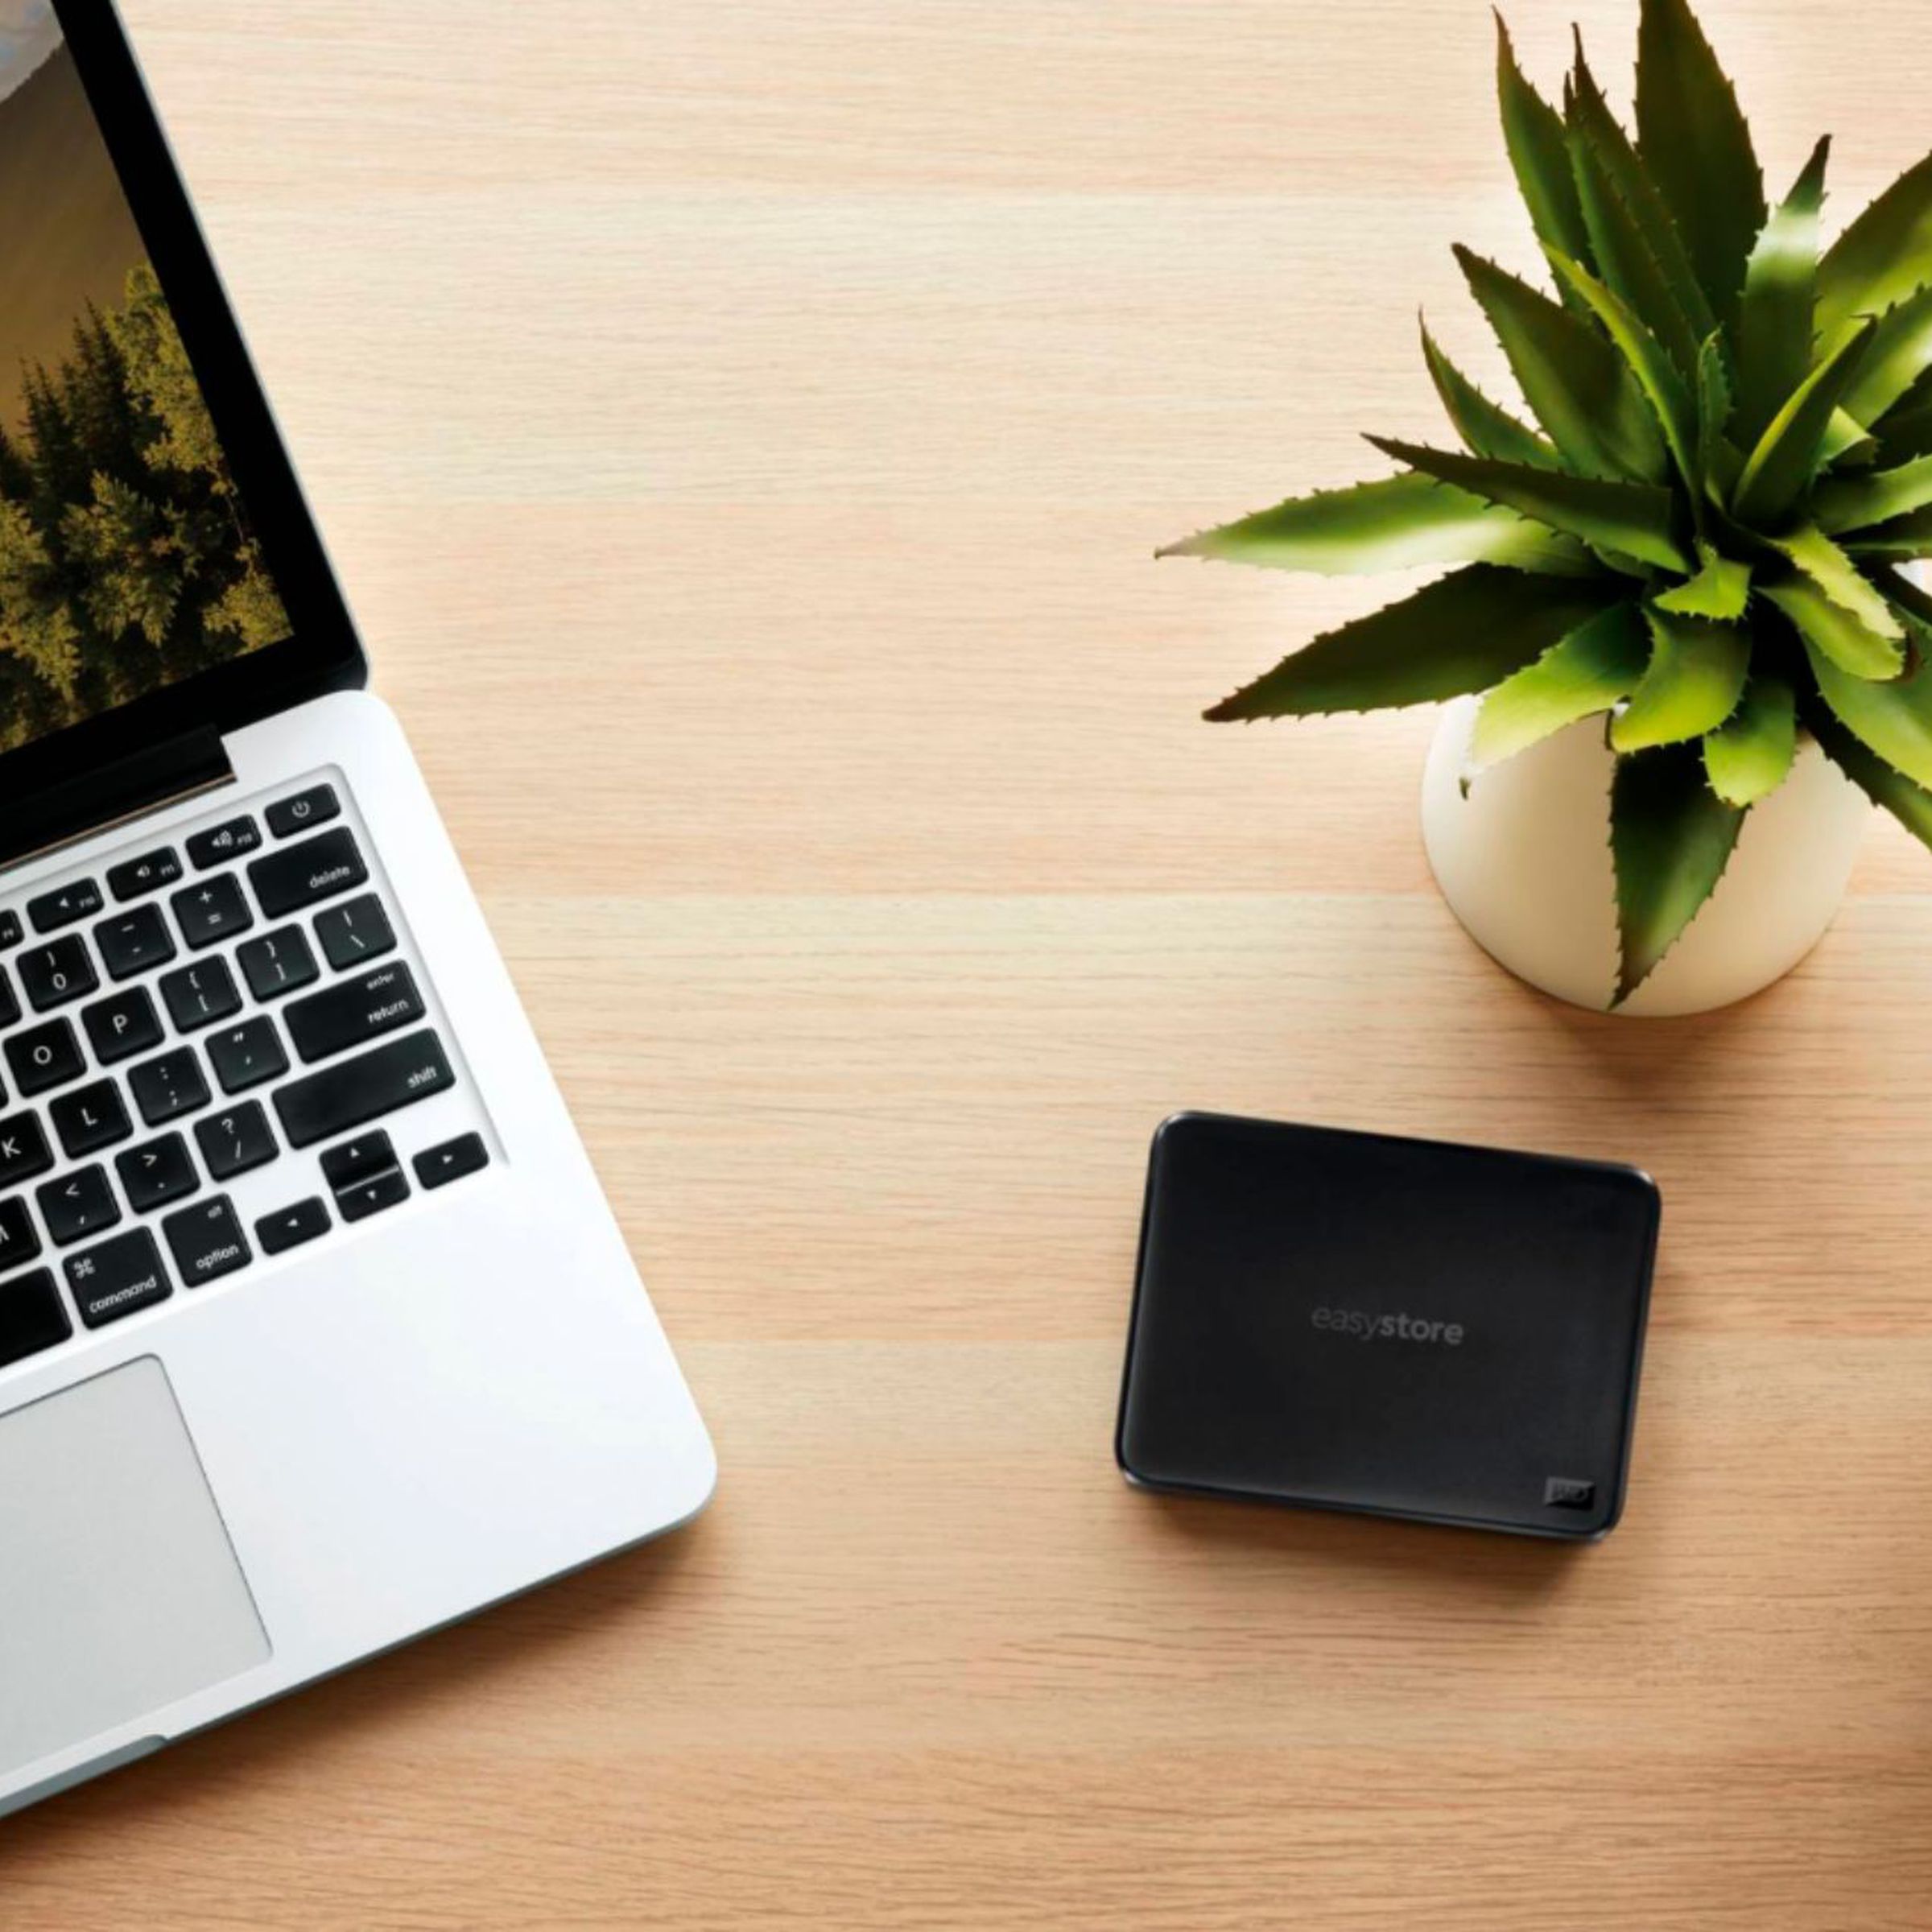 A picture of the Western Digital hard drive on a desk near a laptop, a plant, and pencils.